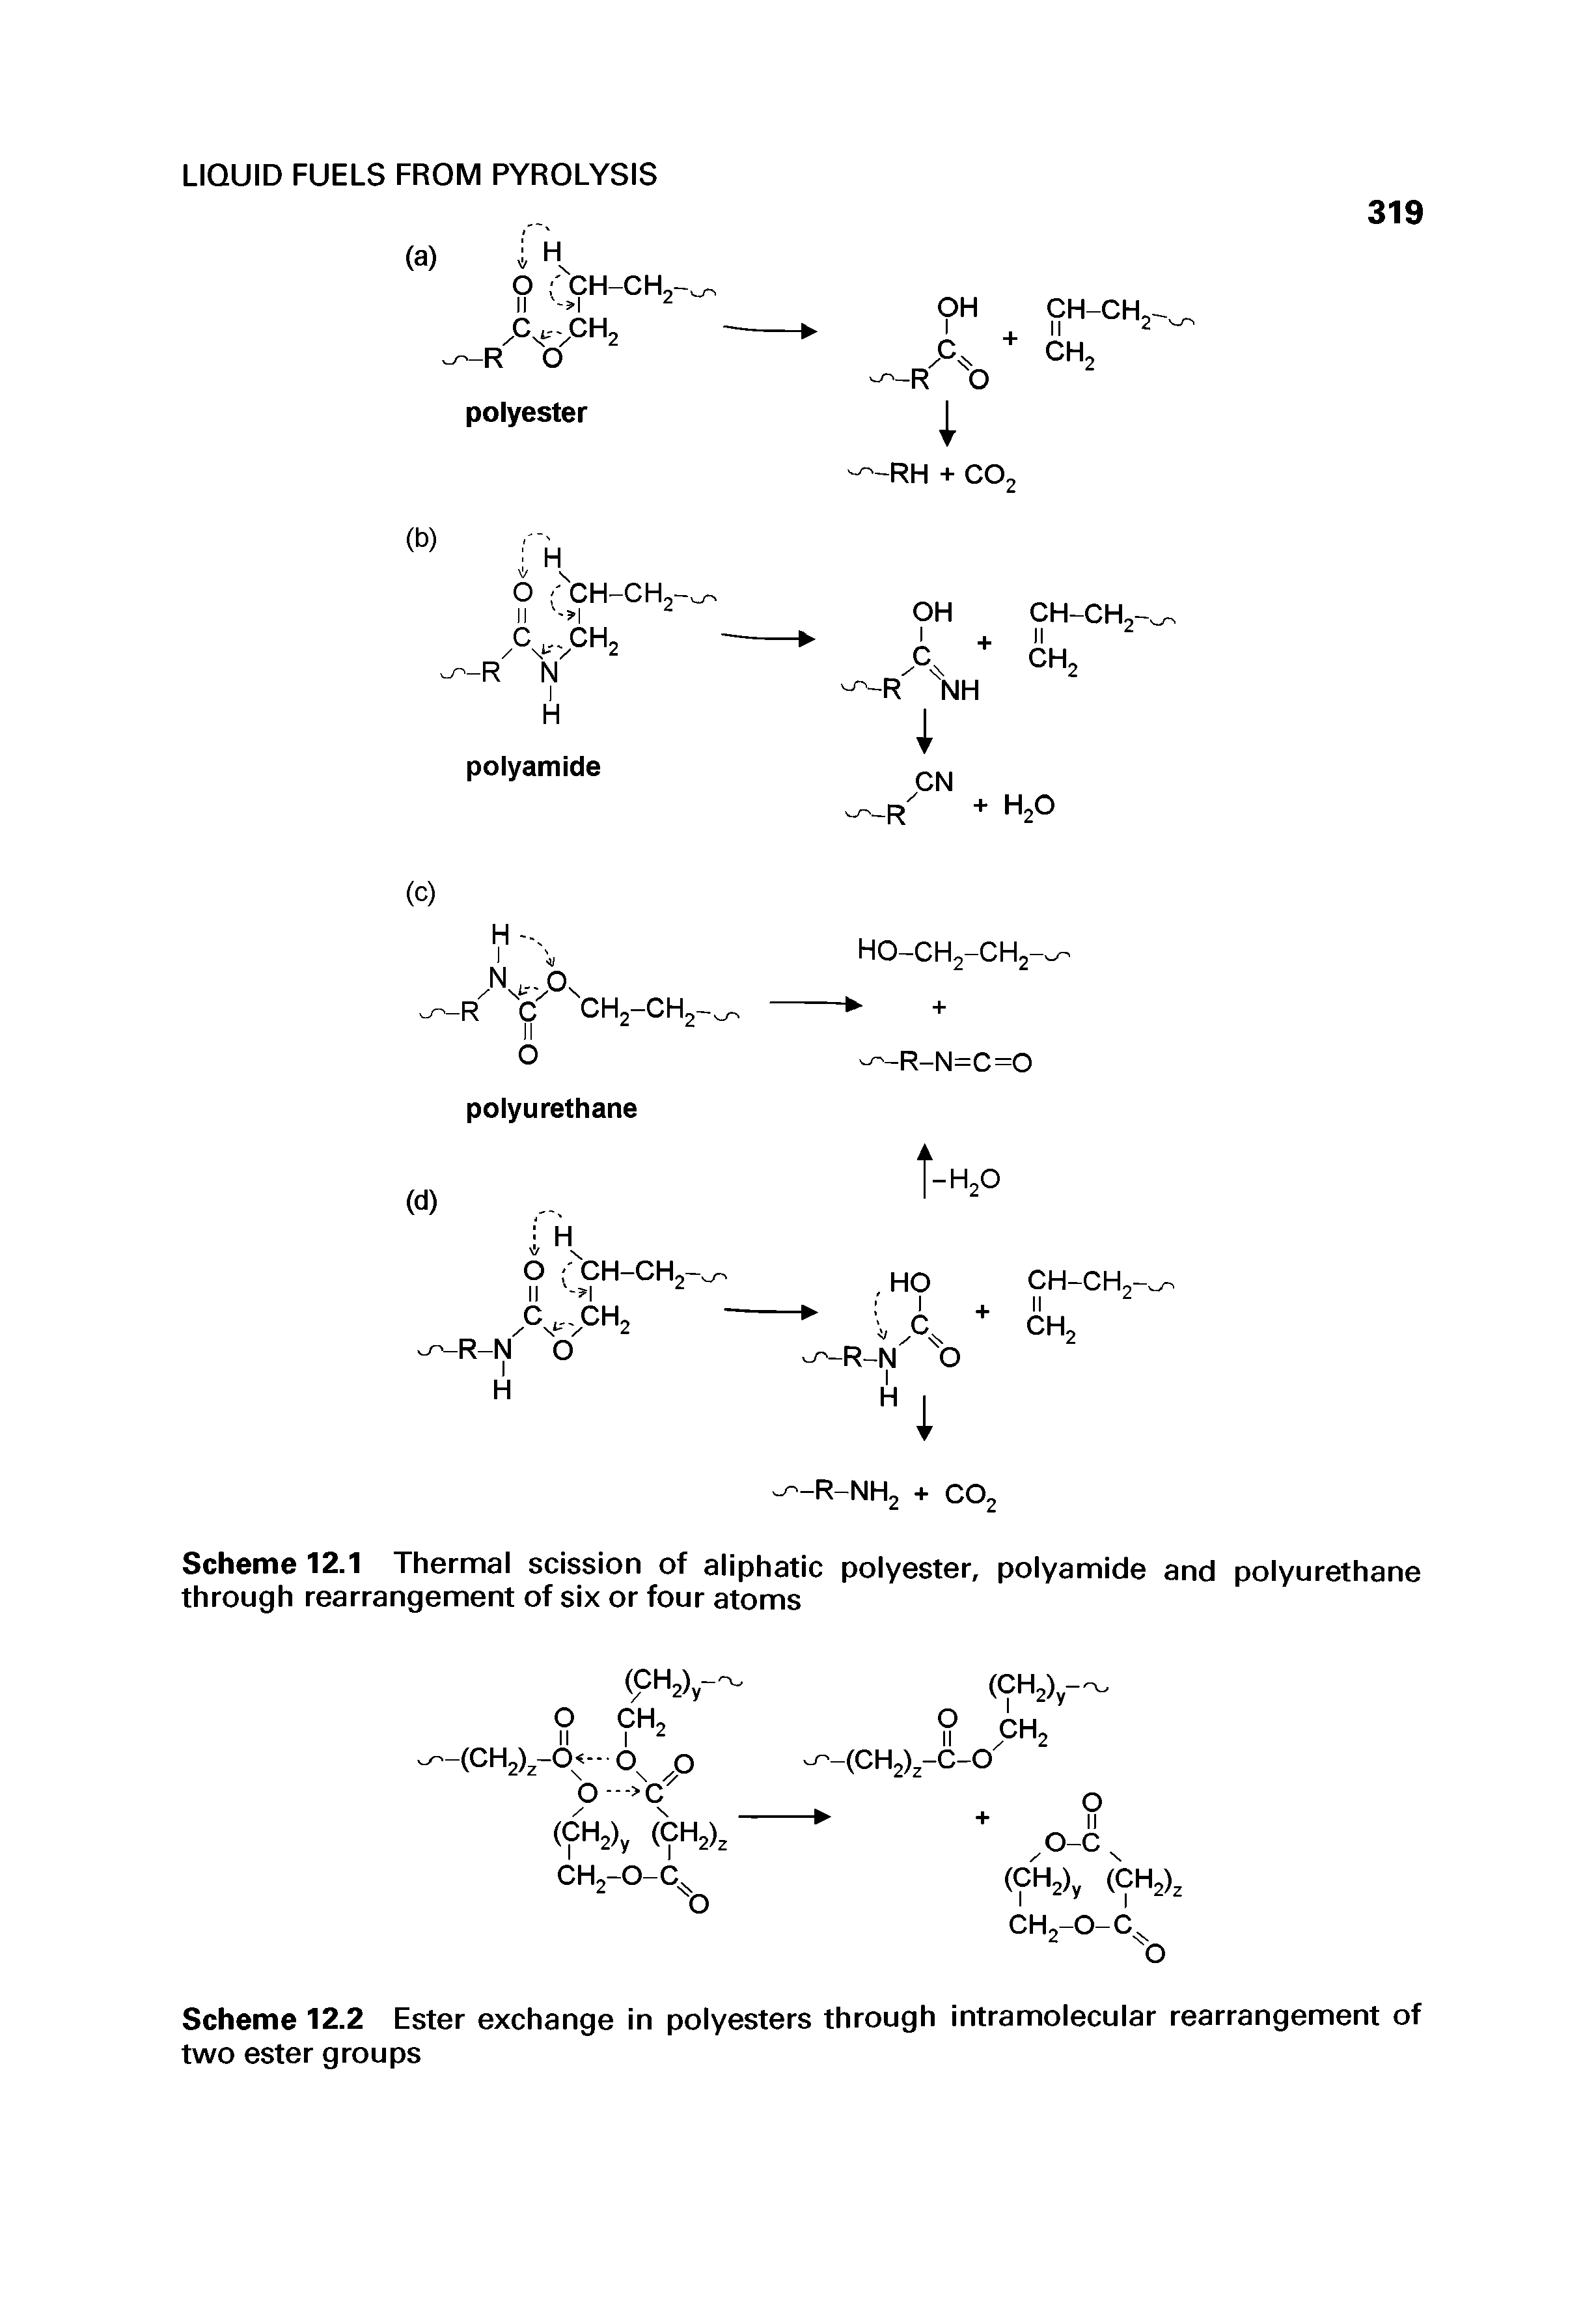 Scheme 12.1 Thermal scission of aliphatic polyester, polyamide and polyurethane through rearrangement of six or four atoms...